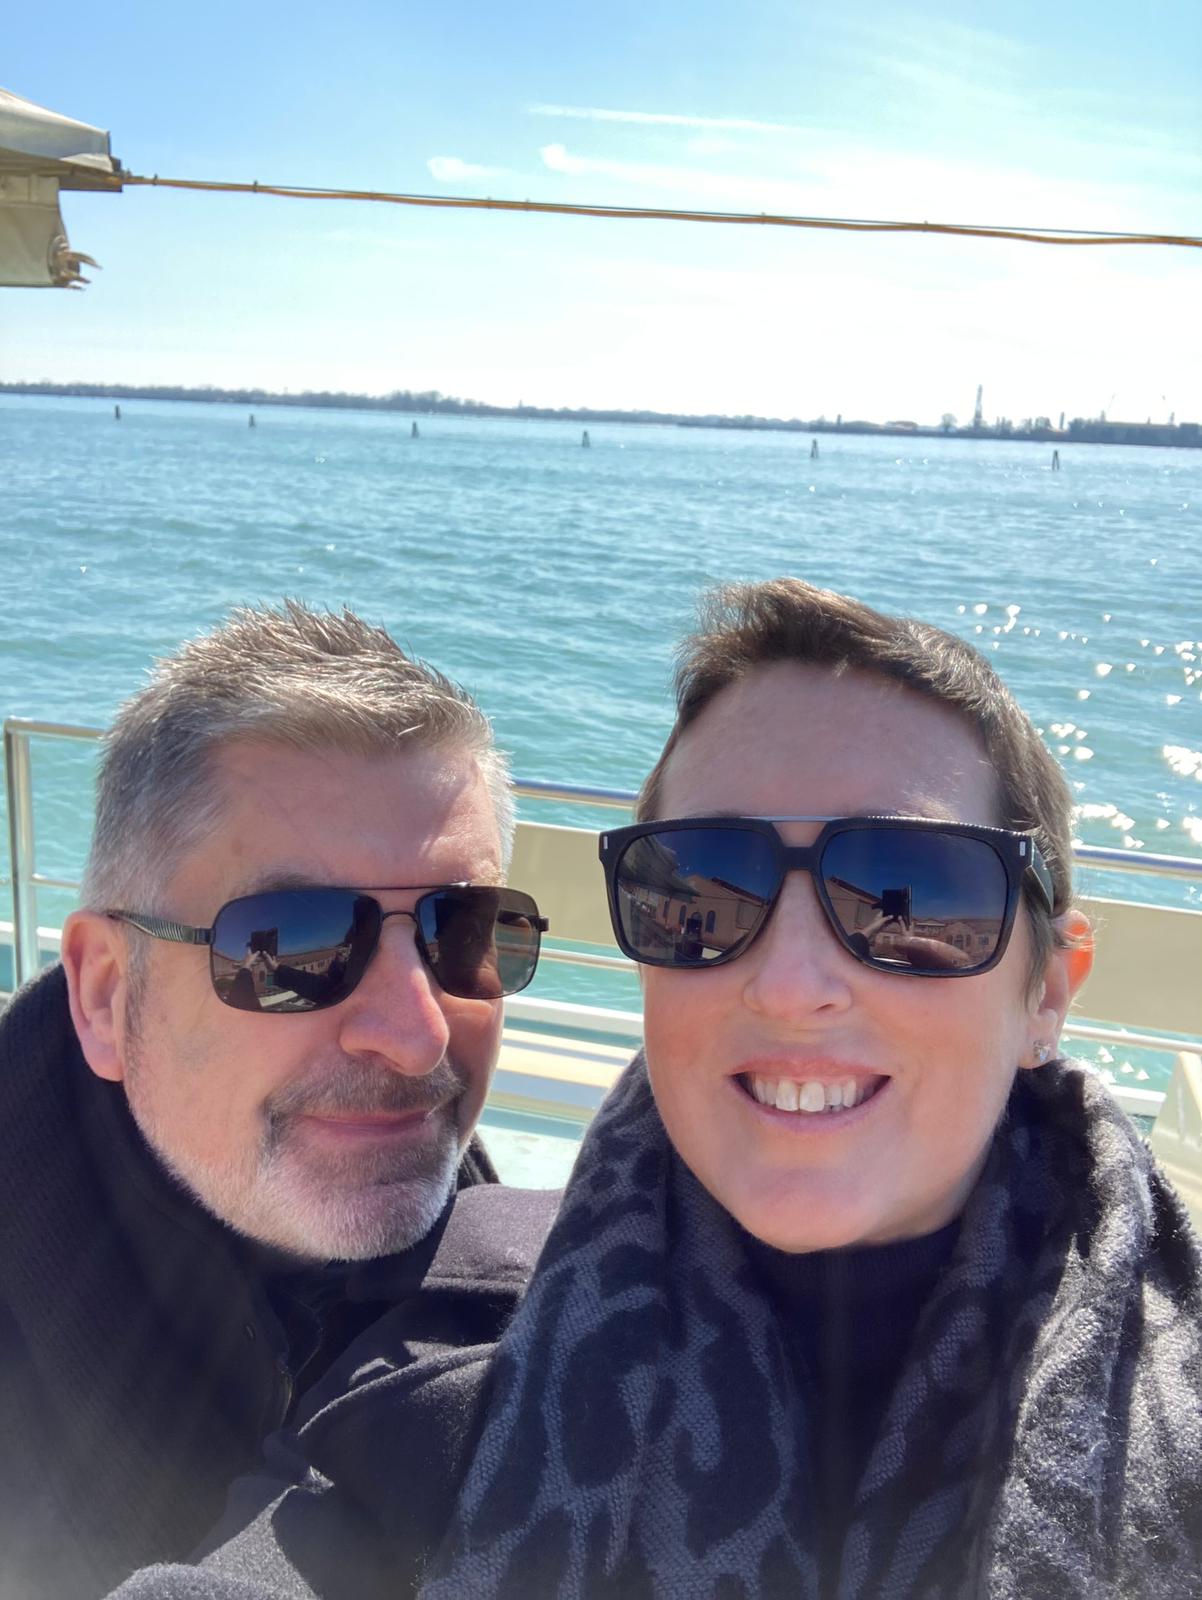 Cheryl and her husband on vacation in Venice! After having contracted COVID-19 multiple times over the past few years, Cheryl finally feels healthy enough to travel again!